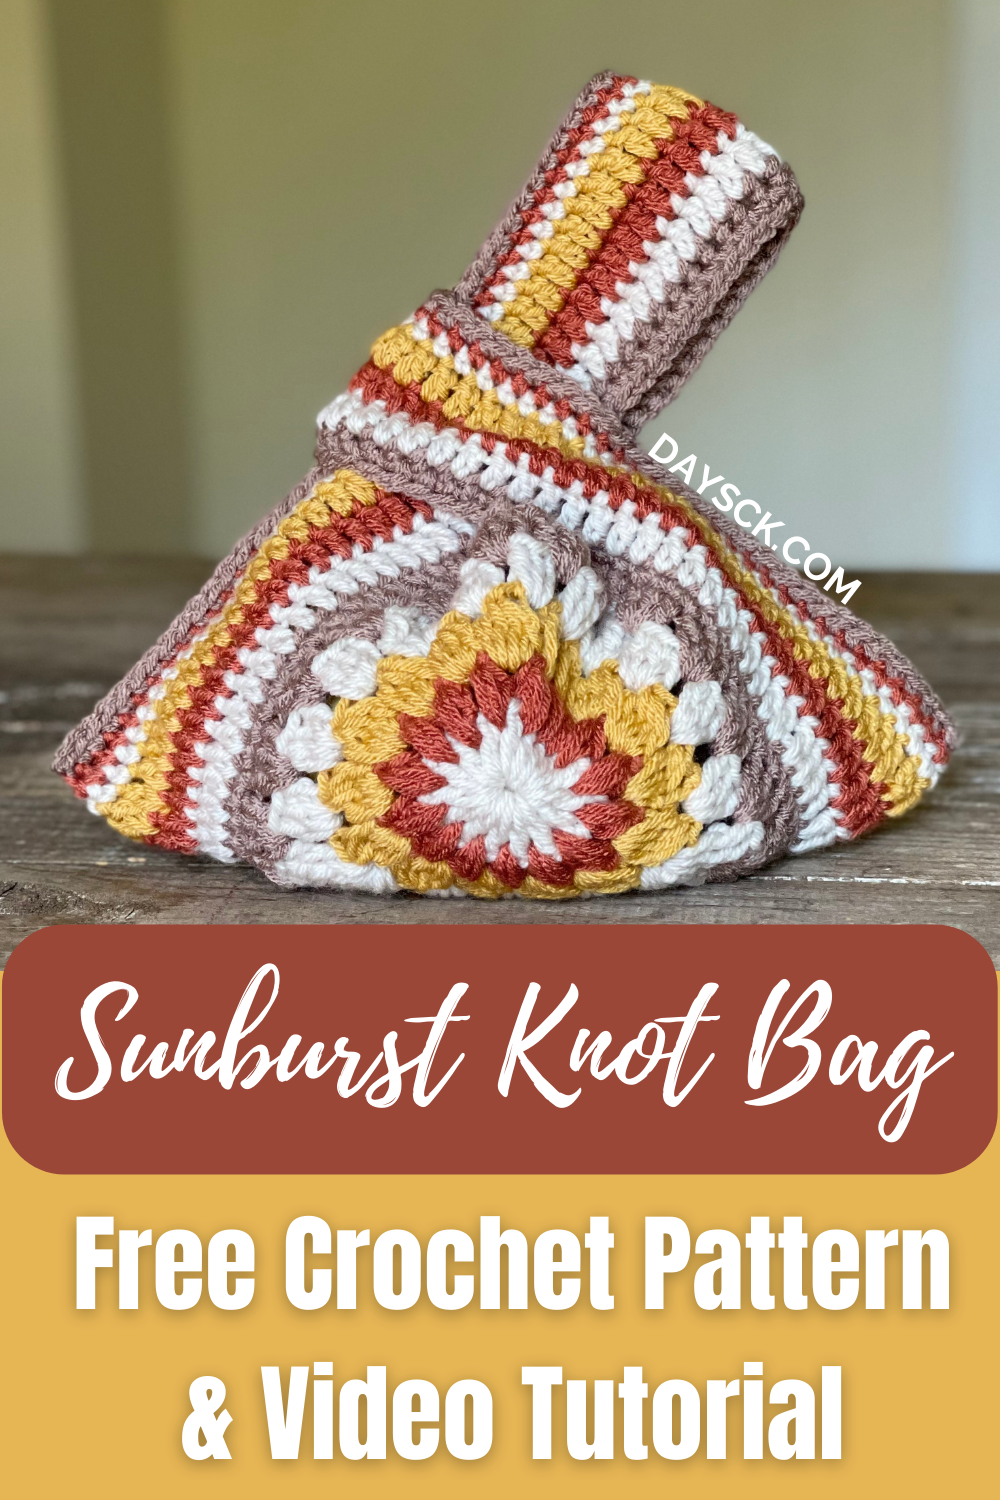 How To Make An Easy Crochet Toddler Bag with Fringe- Free Pattern - A  Crafty Concept